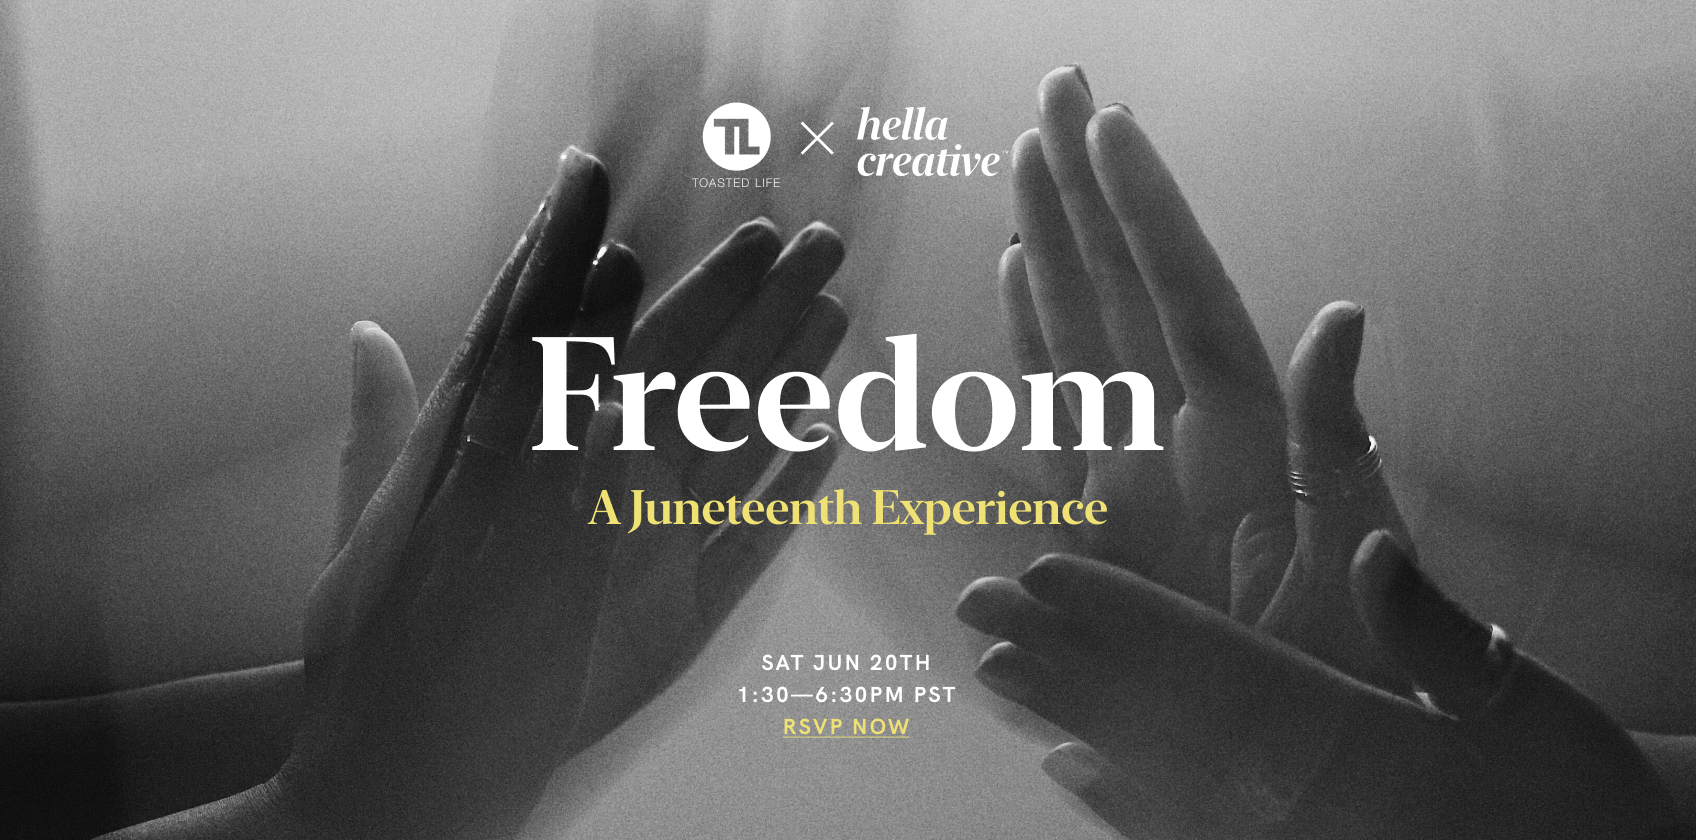 hella-juneteenth-official-event-freedom-toasted-life